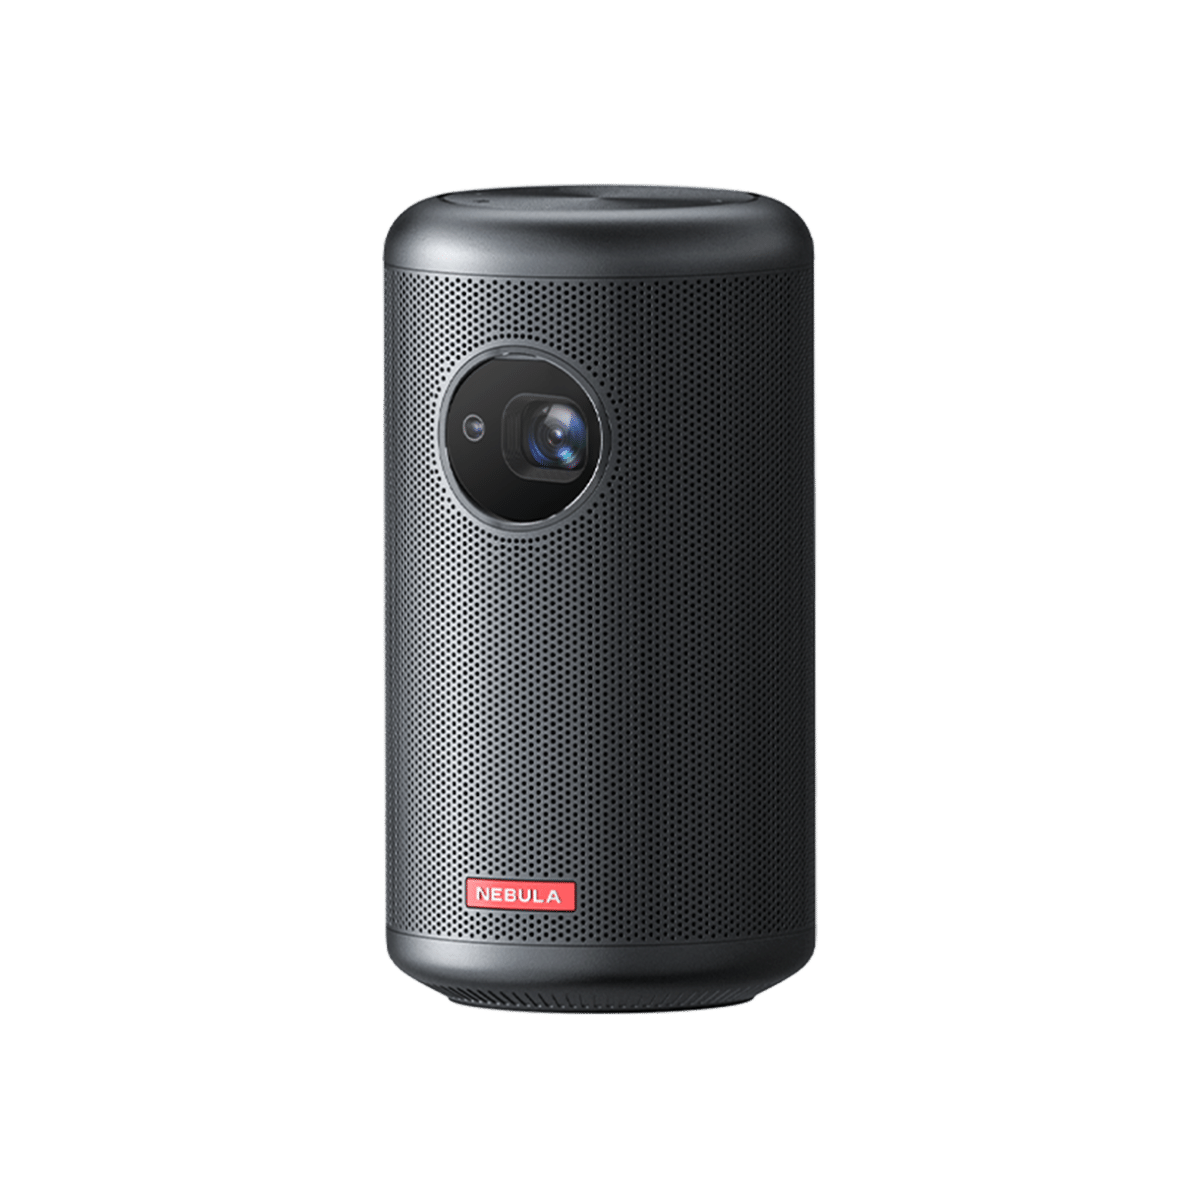 NEBULA by Anker Mars II Pro 500 ANSI Lumen Portable Projector, Native 720P,  40-100 Inch Image TV Projector, Movie Projector with WiFi and Bluetooth